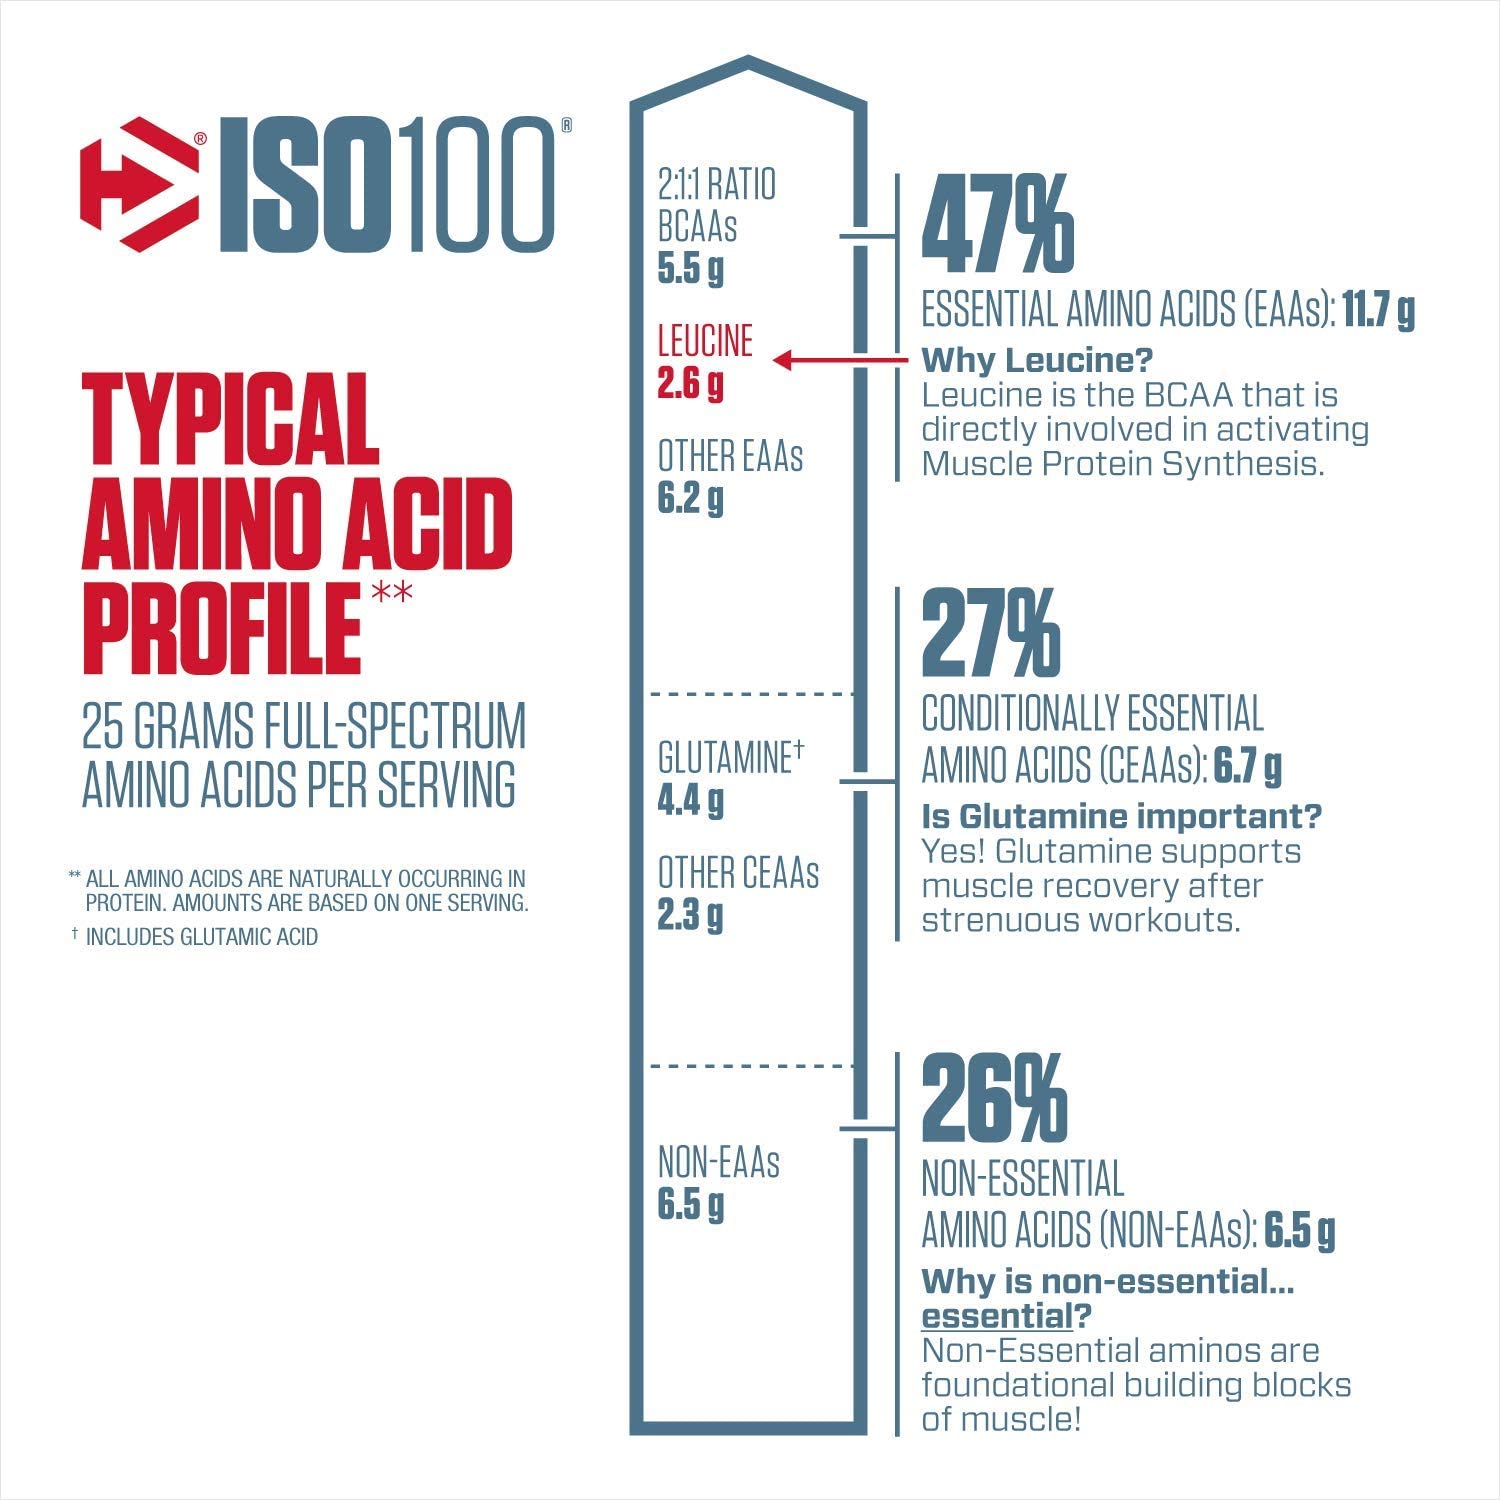 "ISO100 Amino Acid Profile including 25g full-spectrum amino acids, BCAAs, Leucine, Glutamine, and others, supporting muscle recovery."